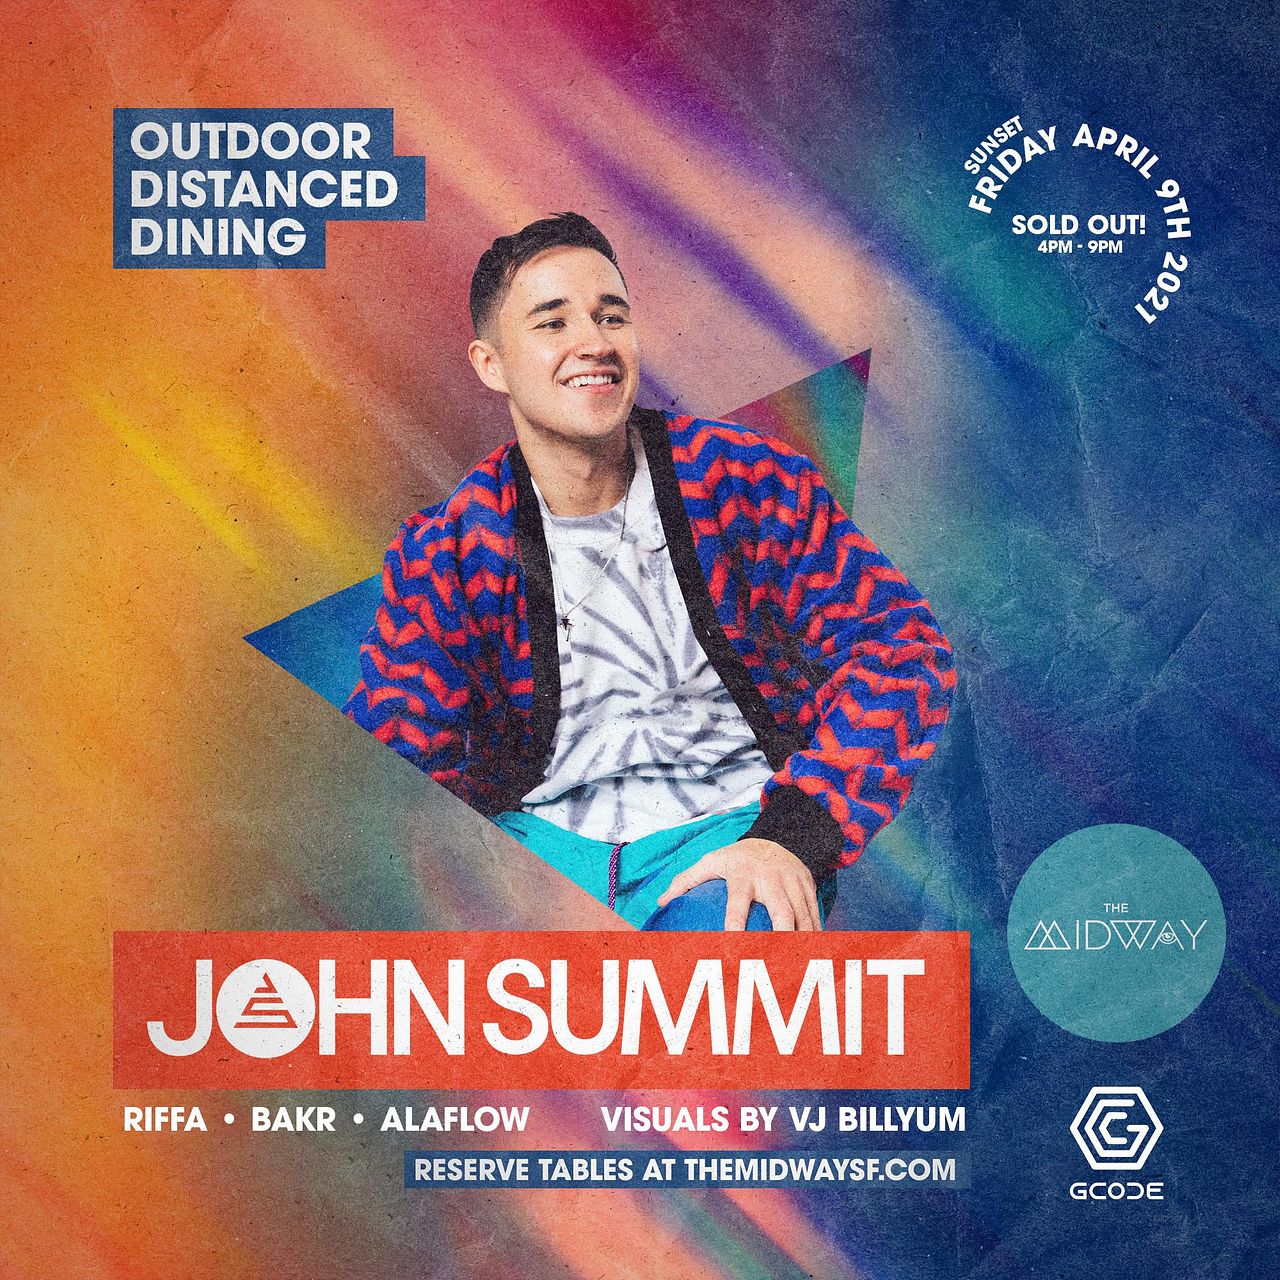 John Summit Outdoor Dining Tickets at The Midway in San Francisco by